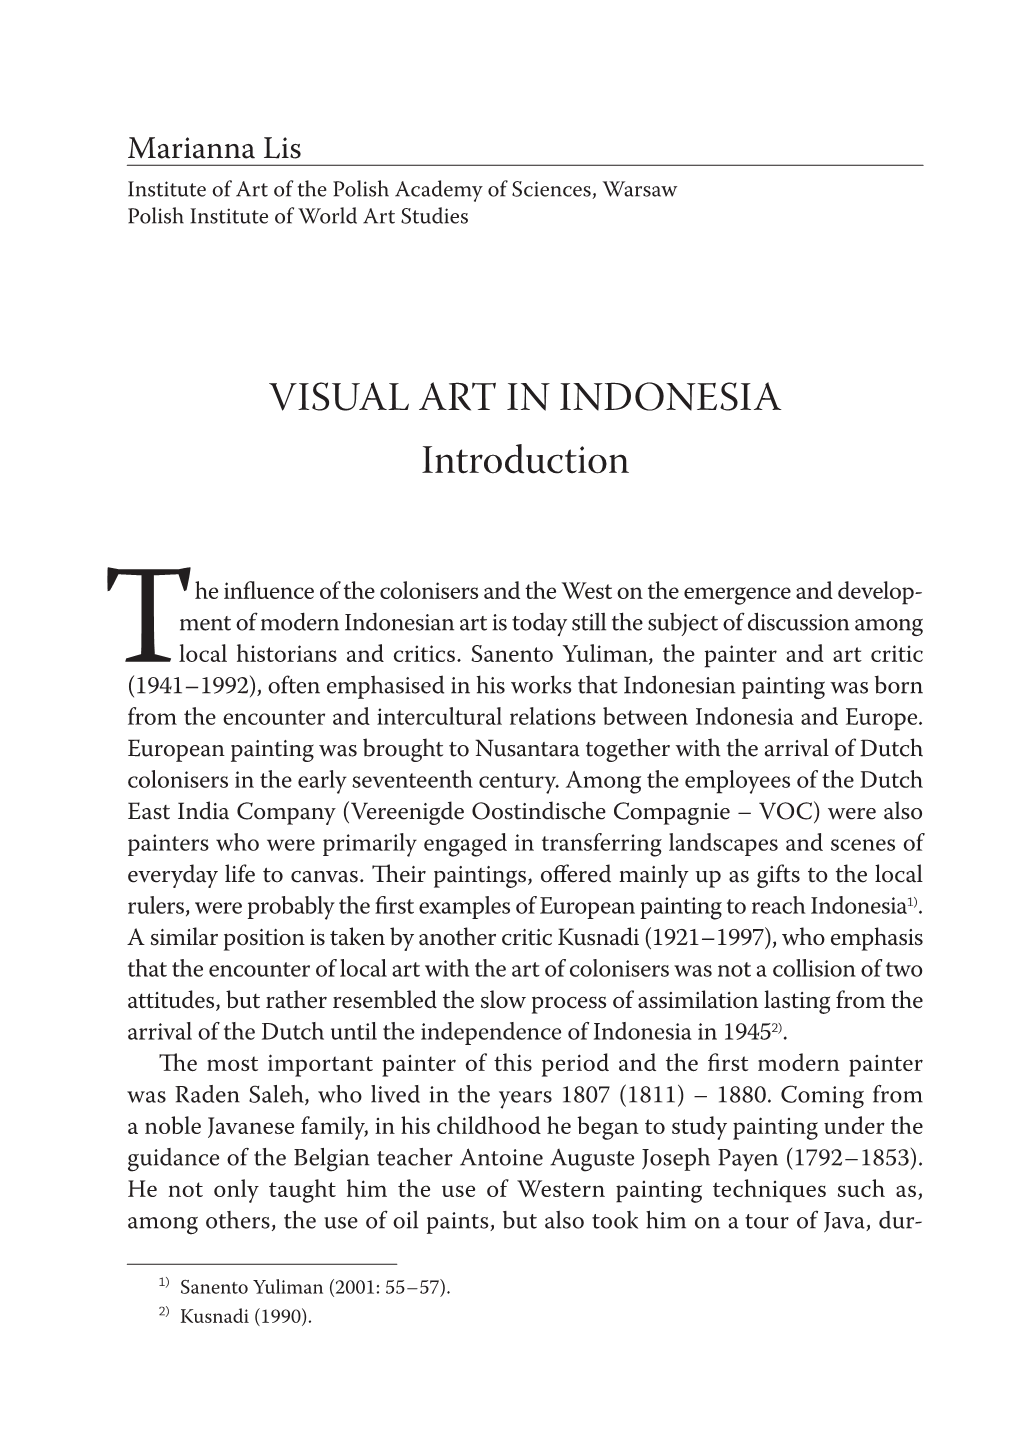 VISUAL ART in INDONESIA Introduction